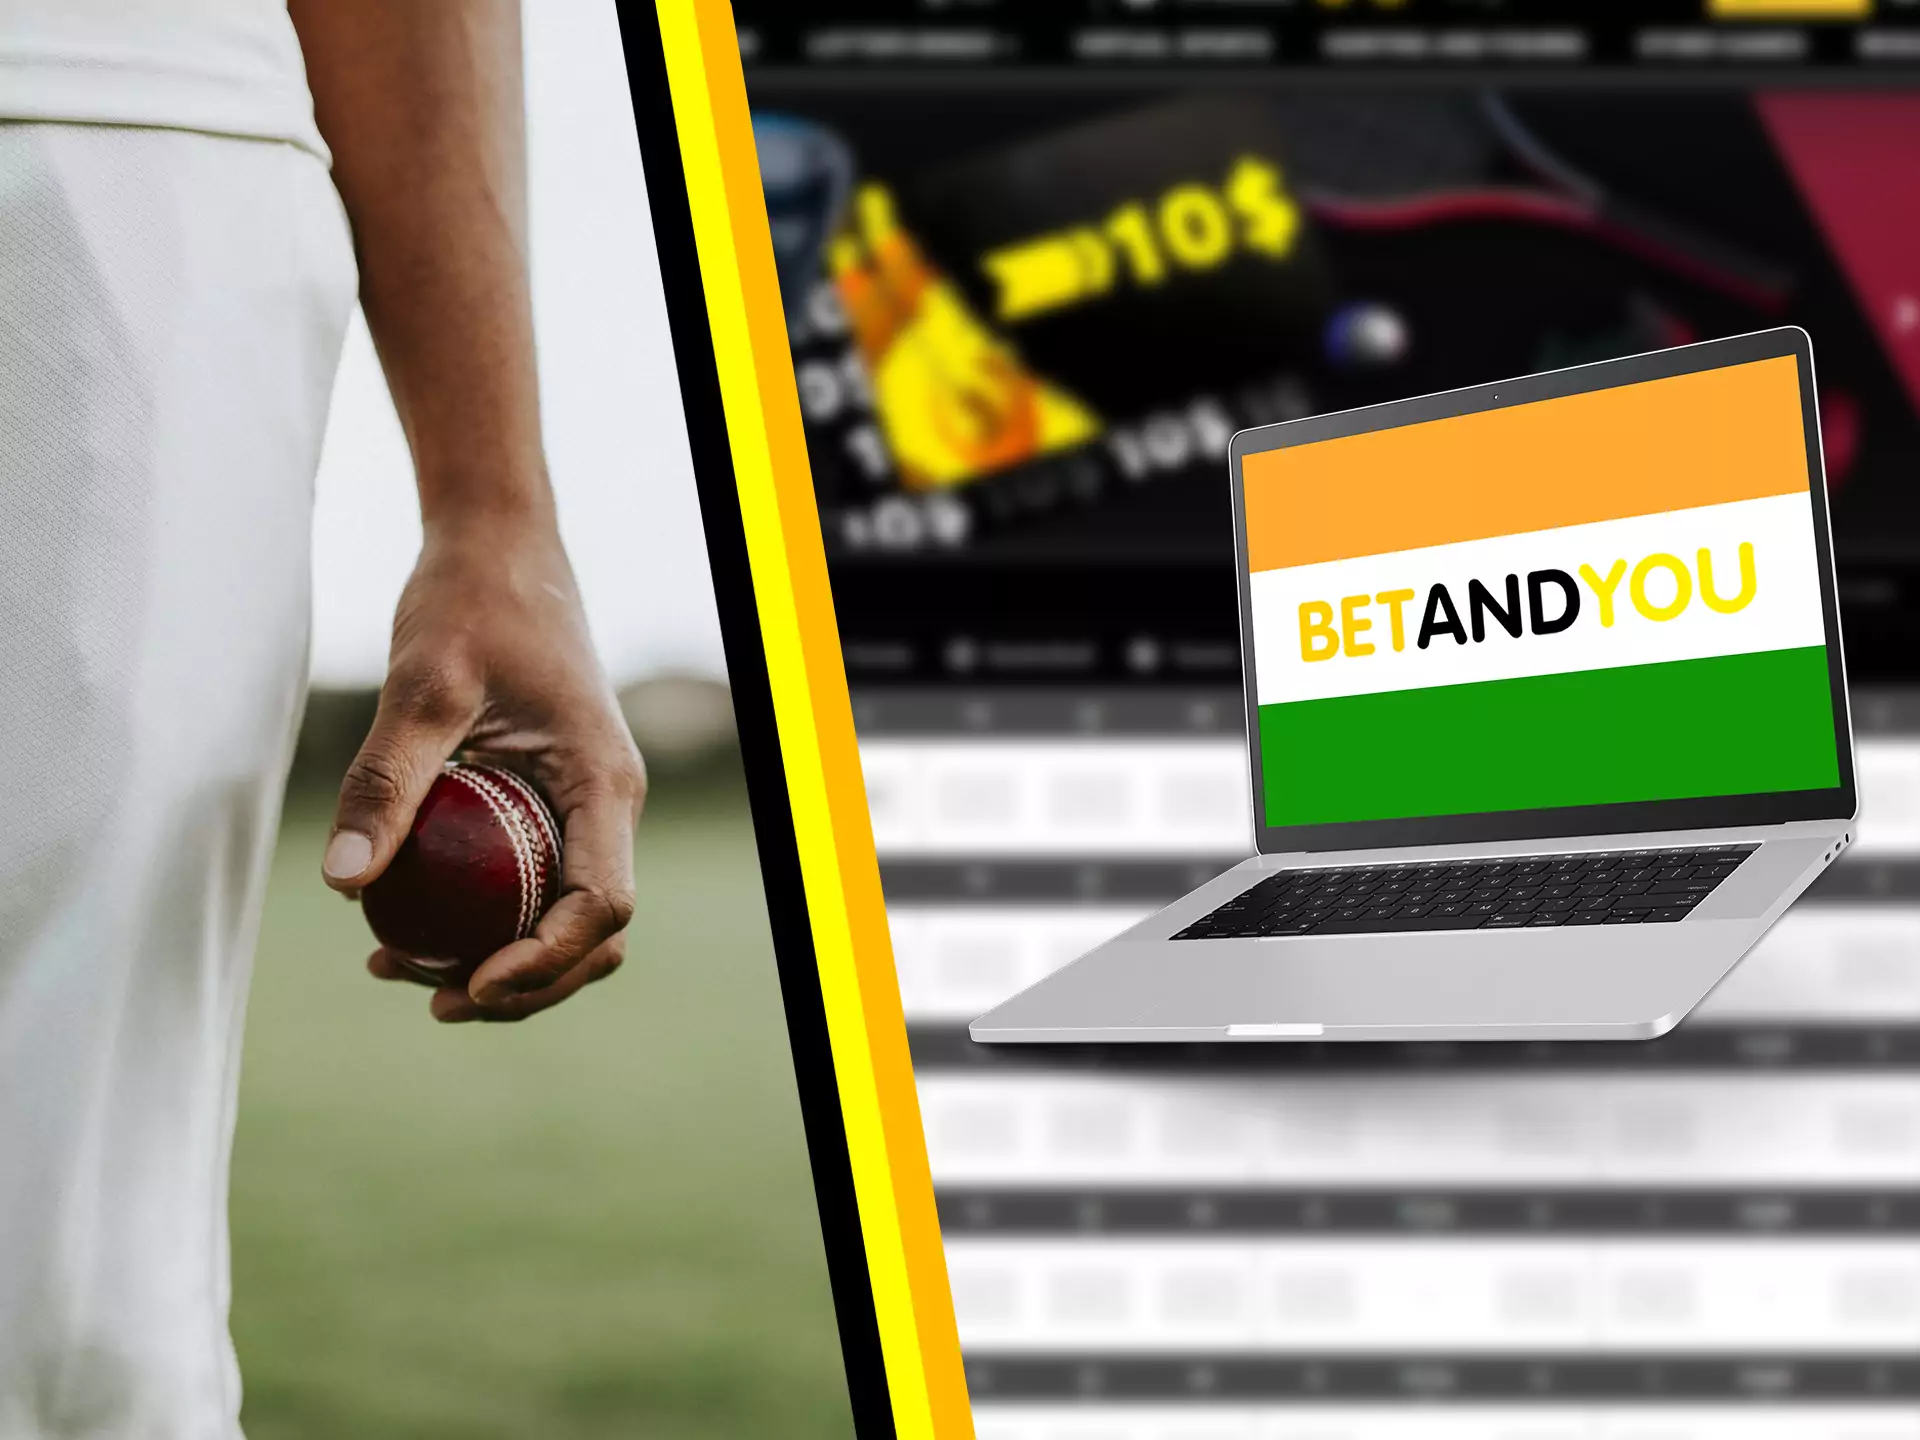 At BetAndYou you can bet on major cricket competitions.